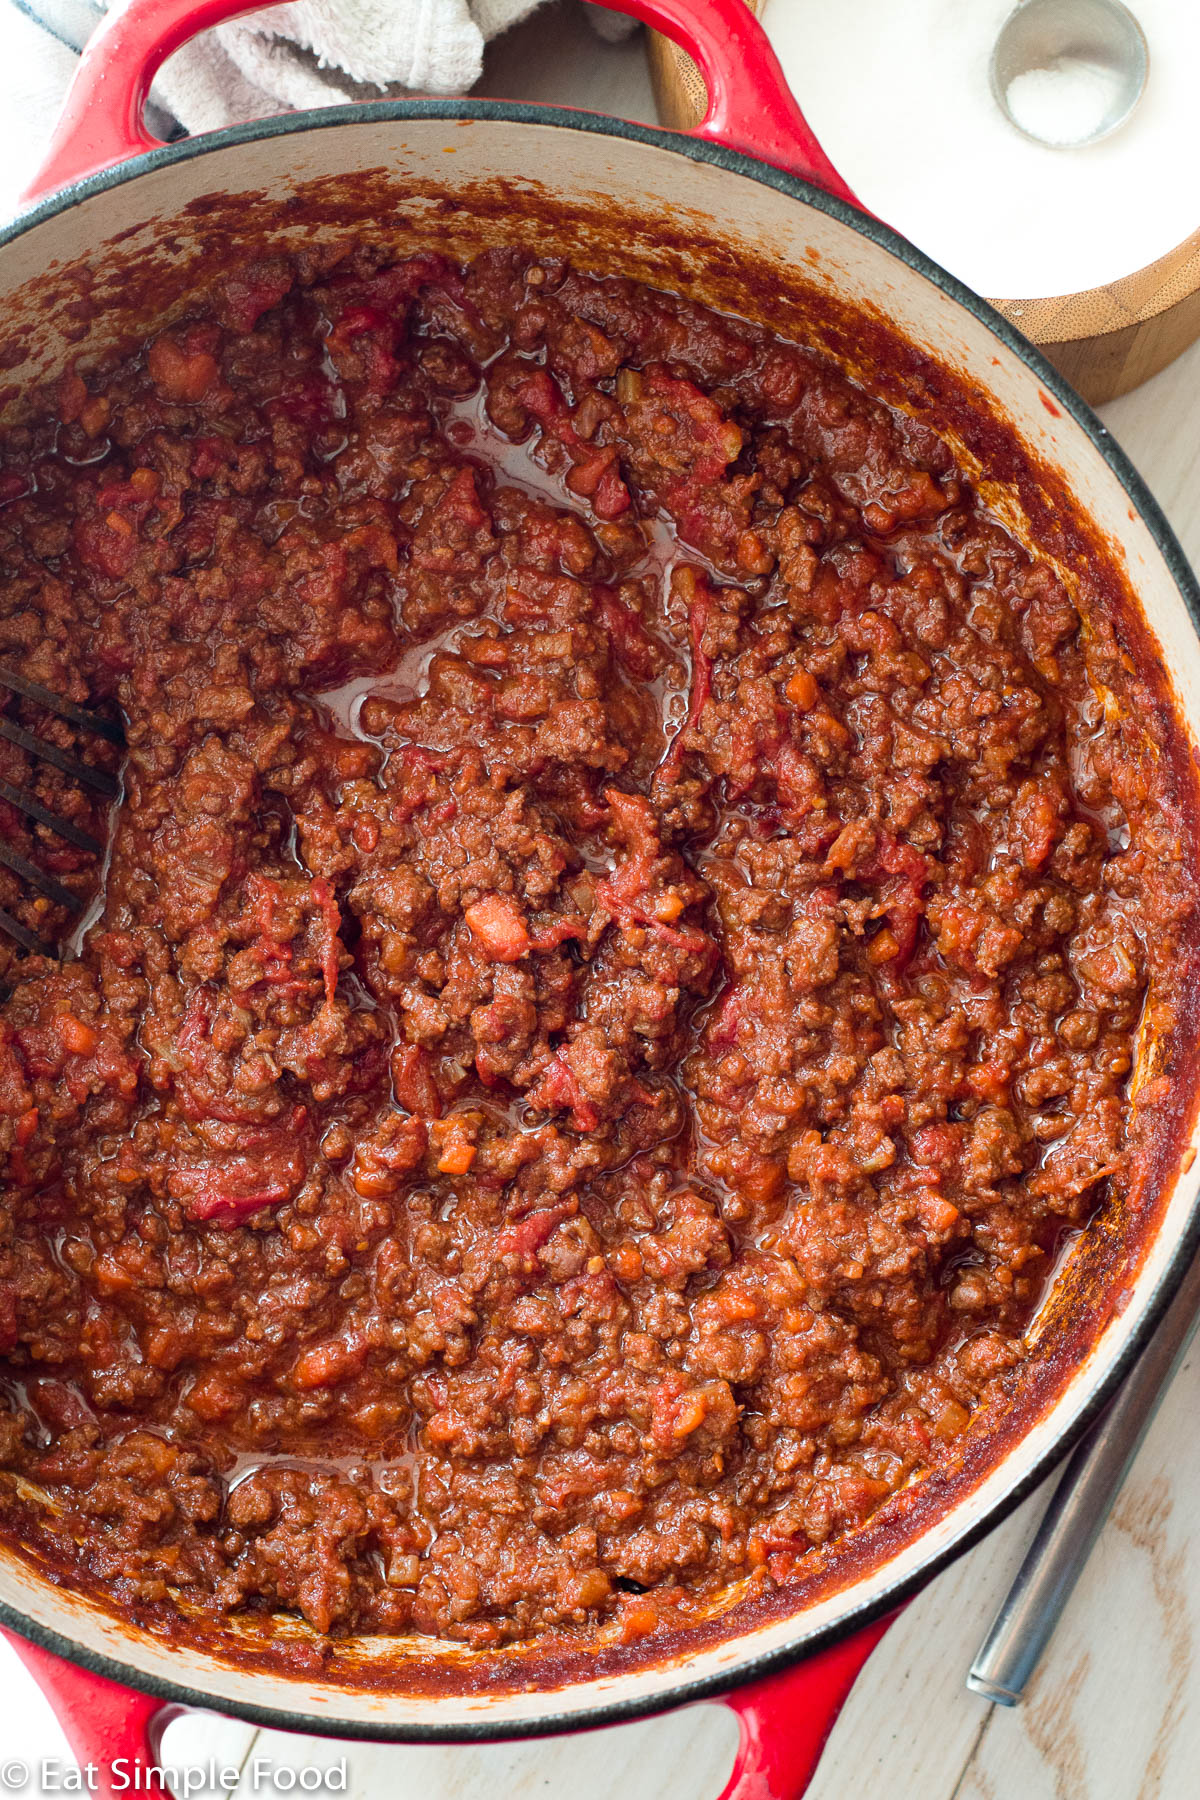 Red cast iron pot filled with meat and tomato bolognese sauce. Top view. Salt bowl on side.